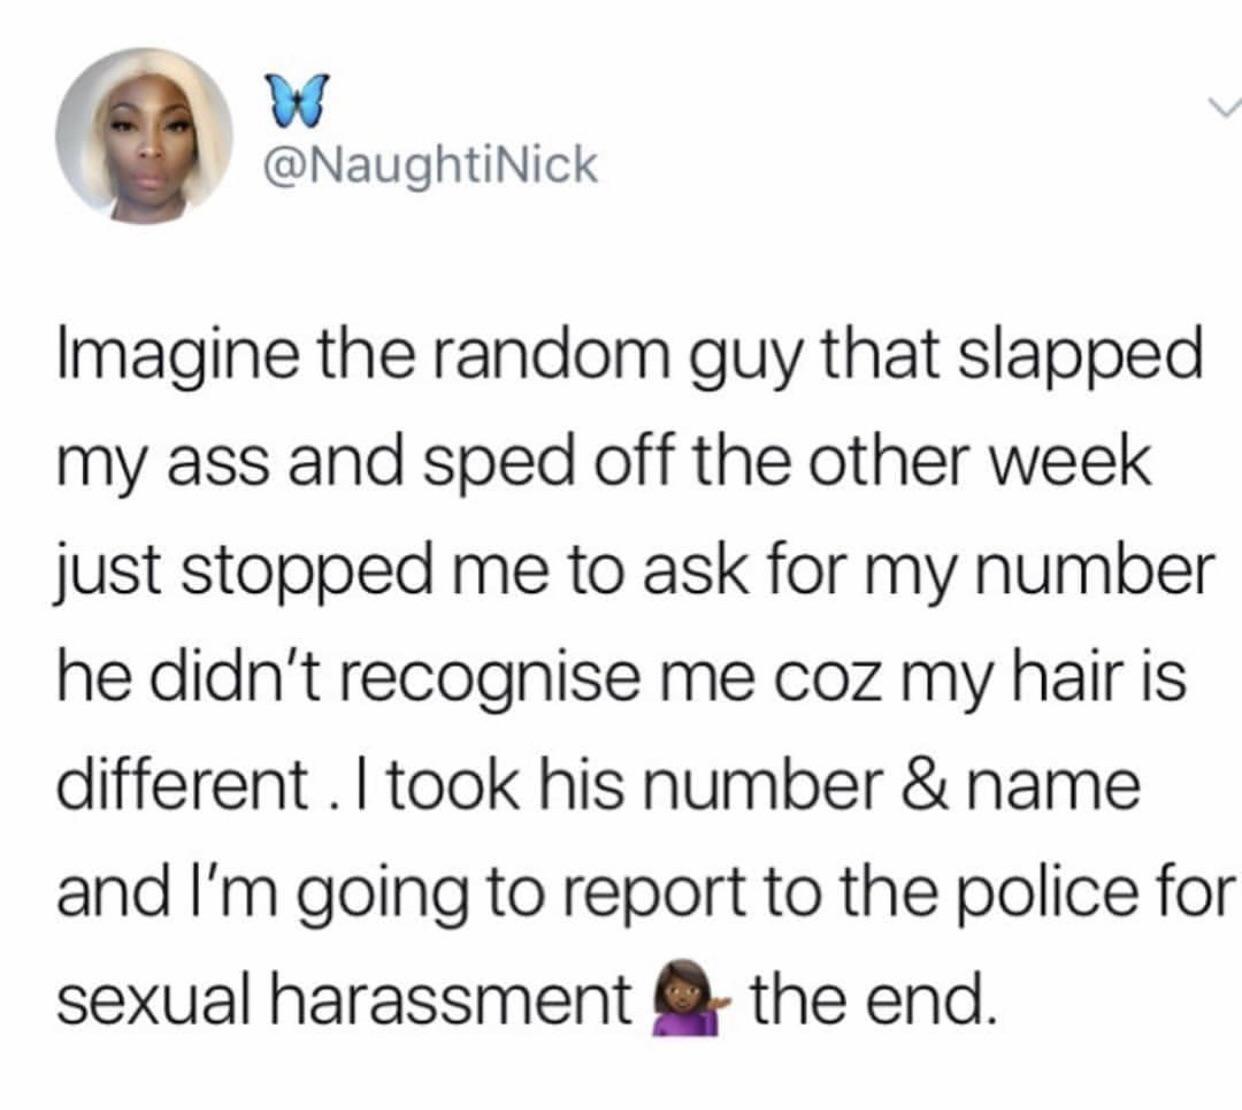 black twitter - Imagine the random guy that slapped my ass and sped off the other week just stopped me to ask for my number he didn't recognise me coz my hair is different. I took his number & name and I'm going to report to the police for sexual harassme